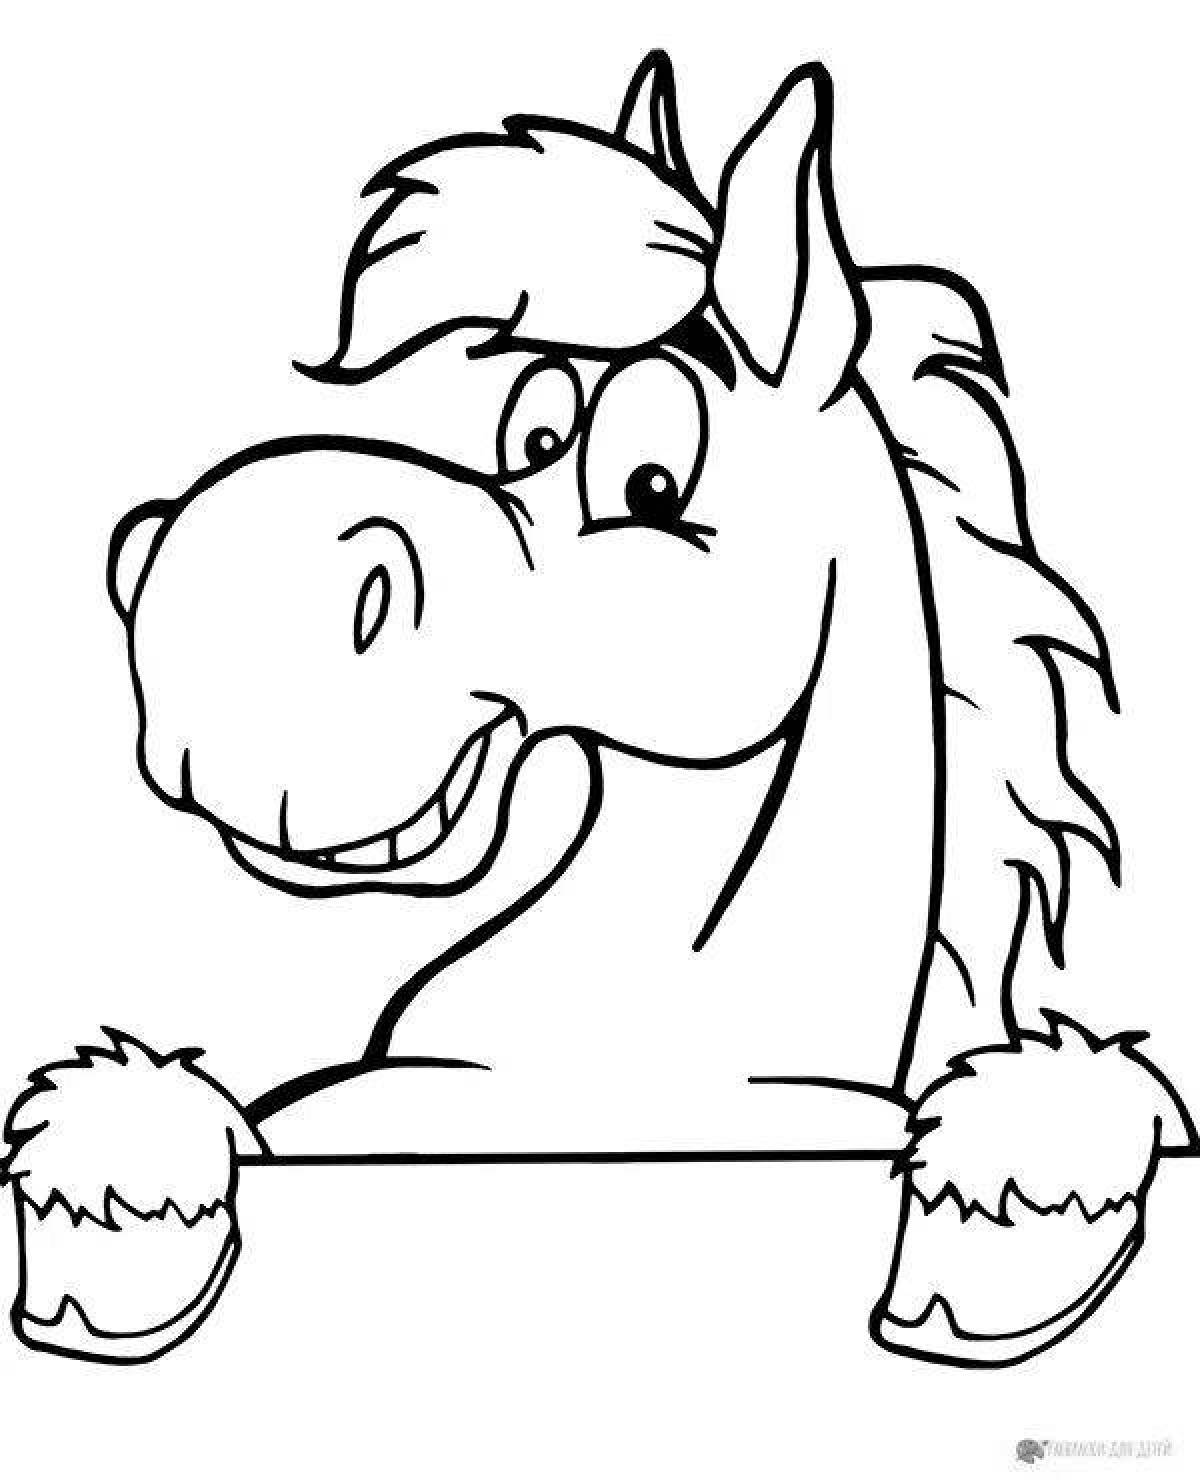 Adorable horse face coloring page